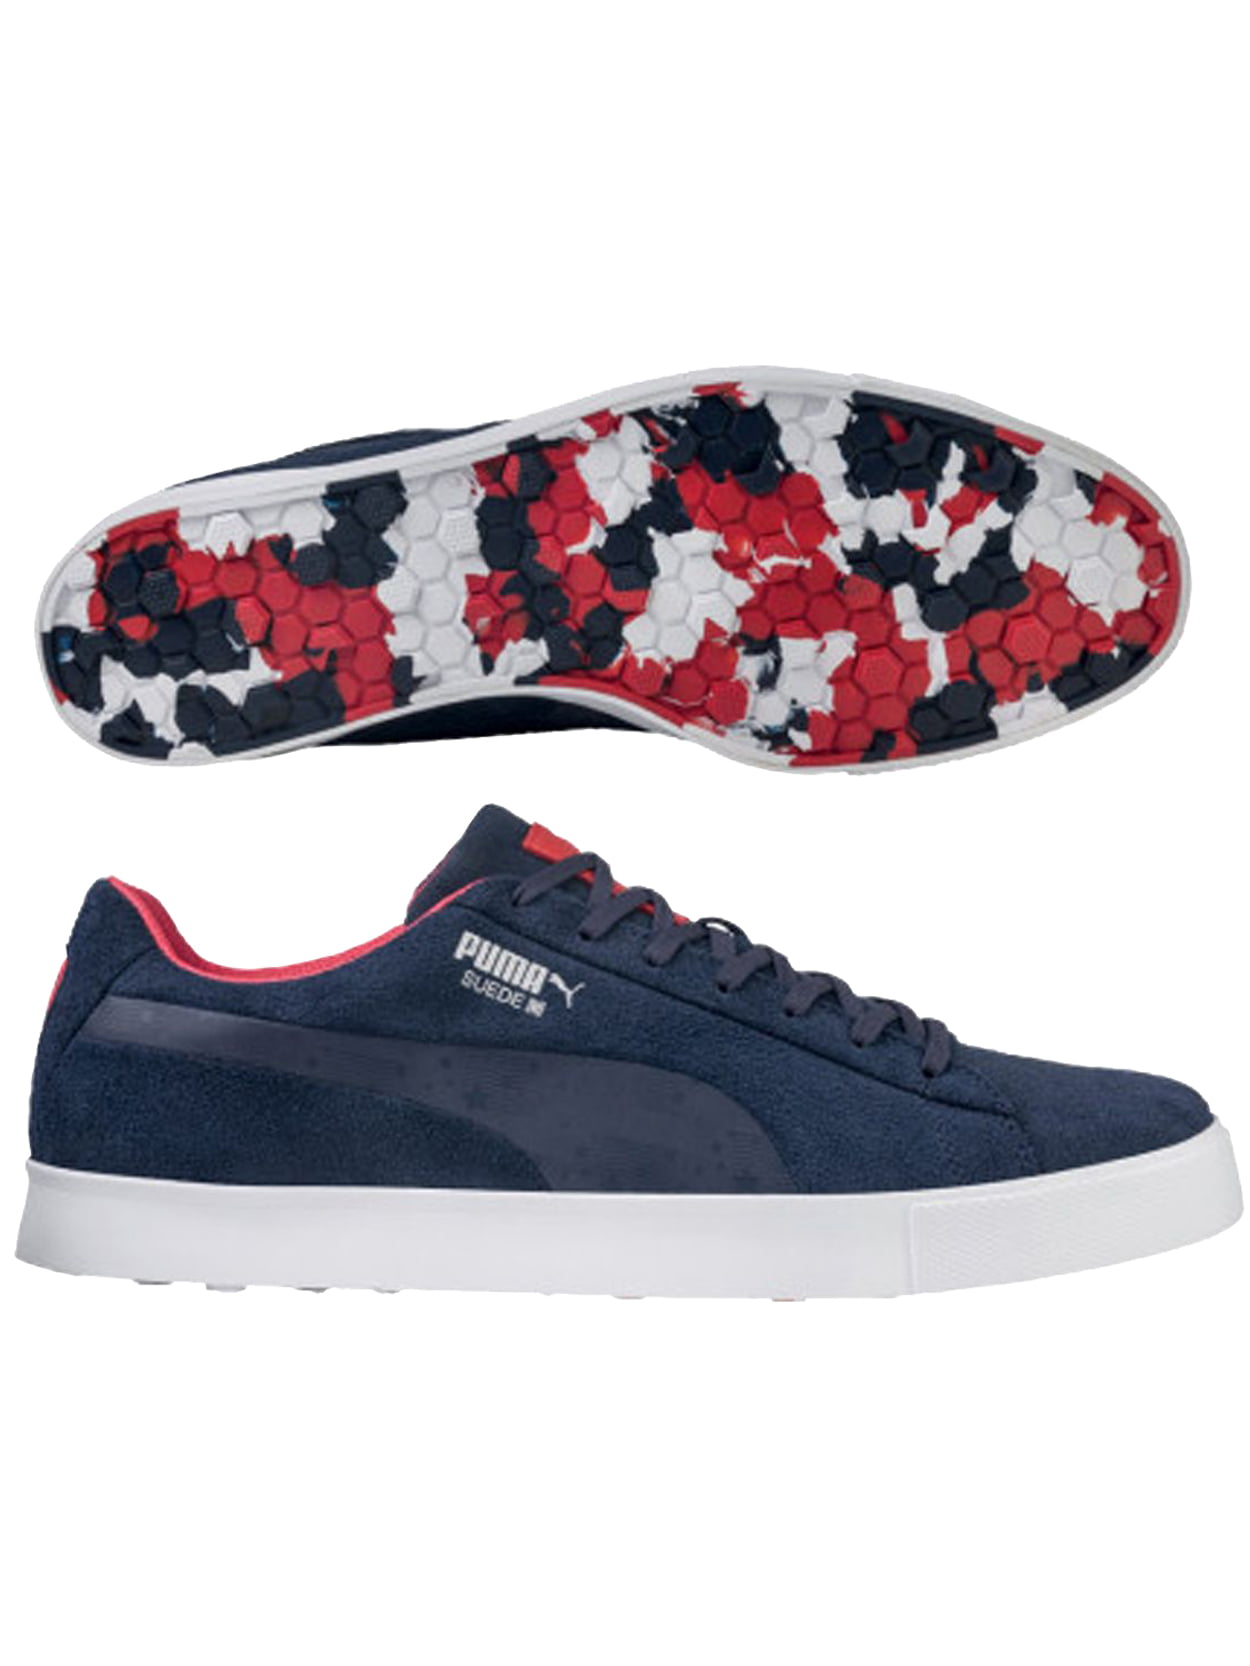 puma ryder cup shoes